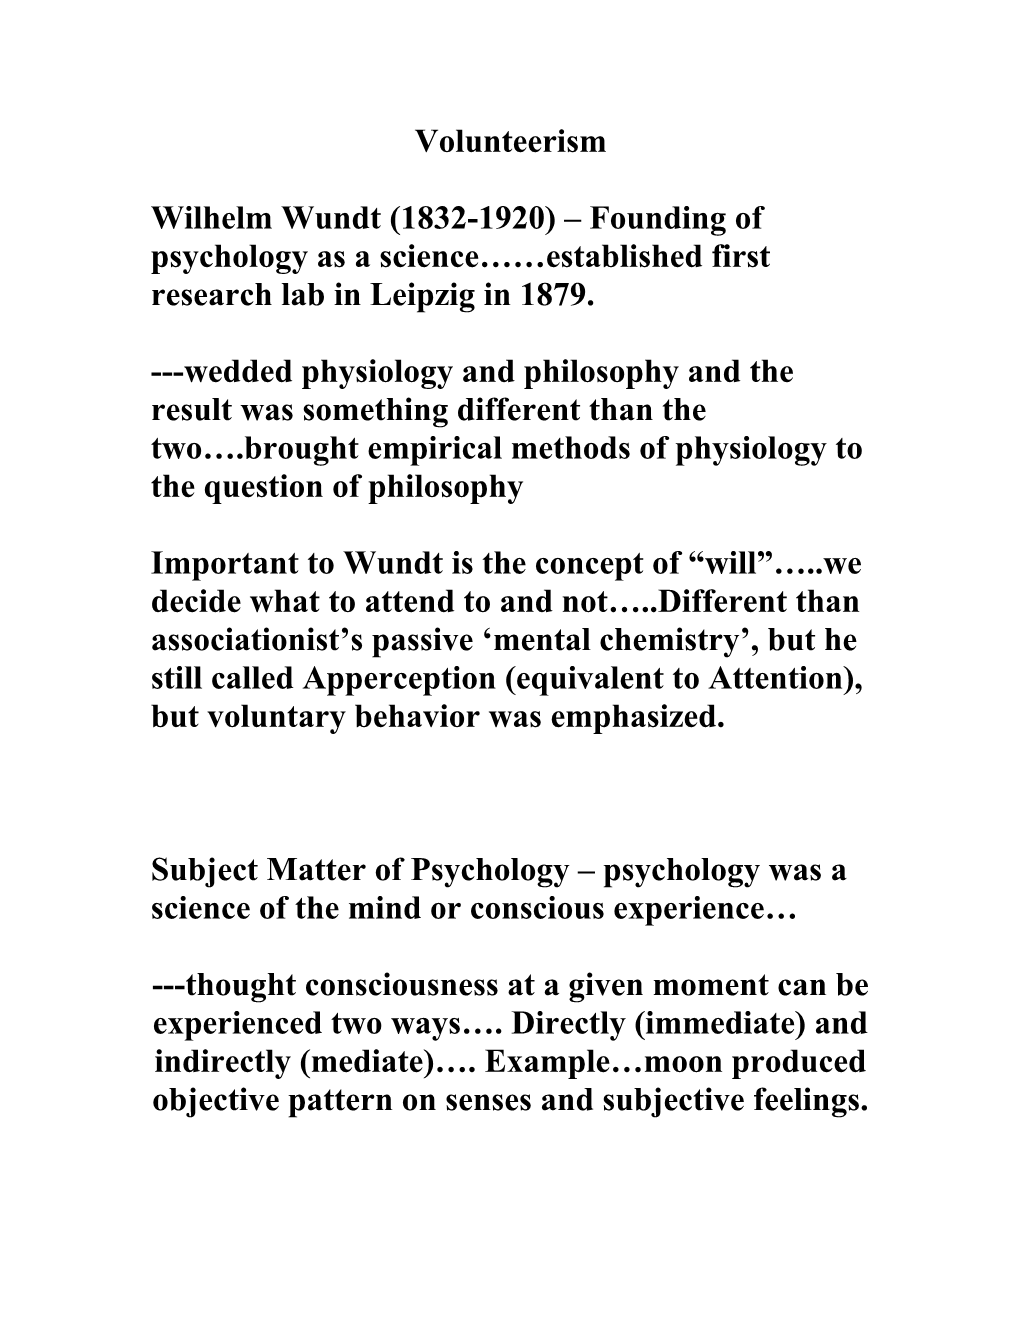 Wilhelm Wundt (1832-1920) Founding of Psychology As a Science Established First Research